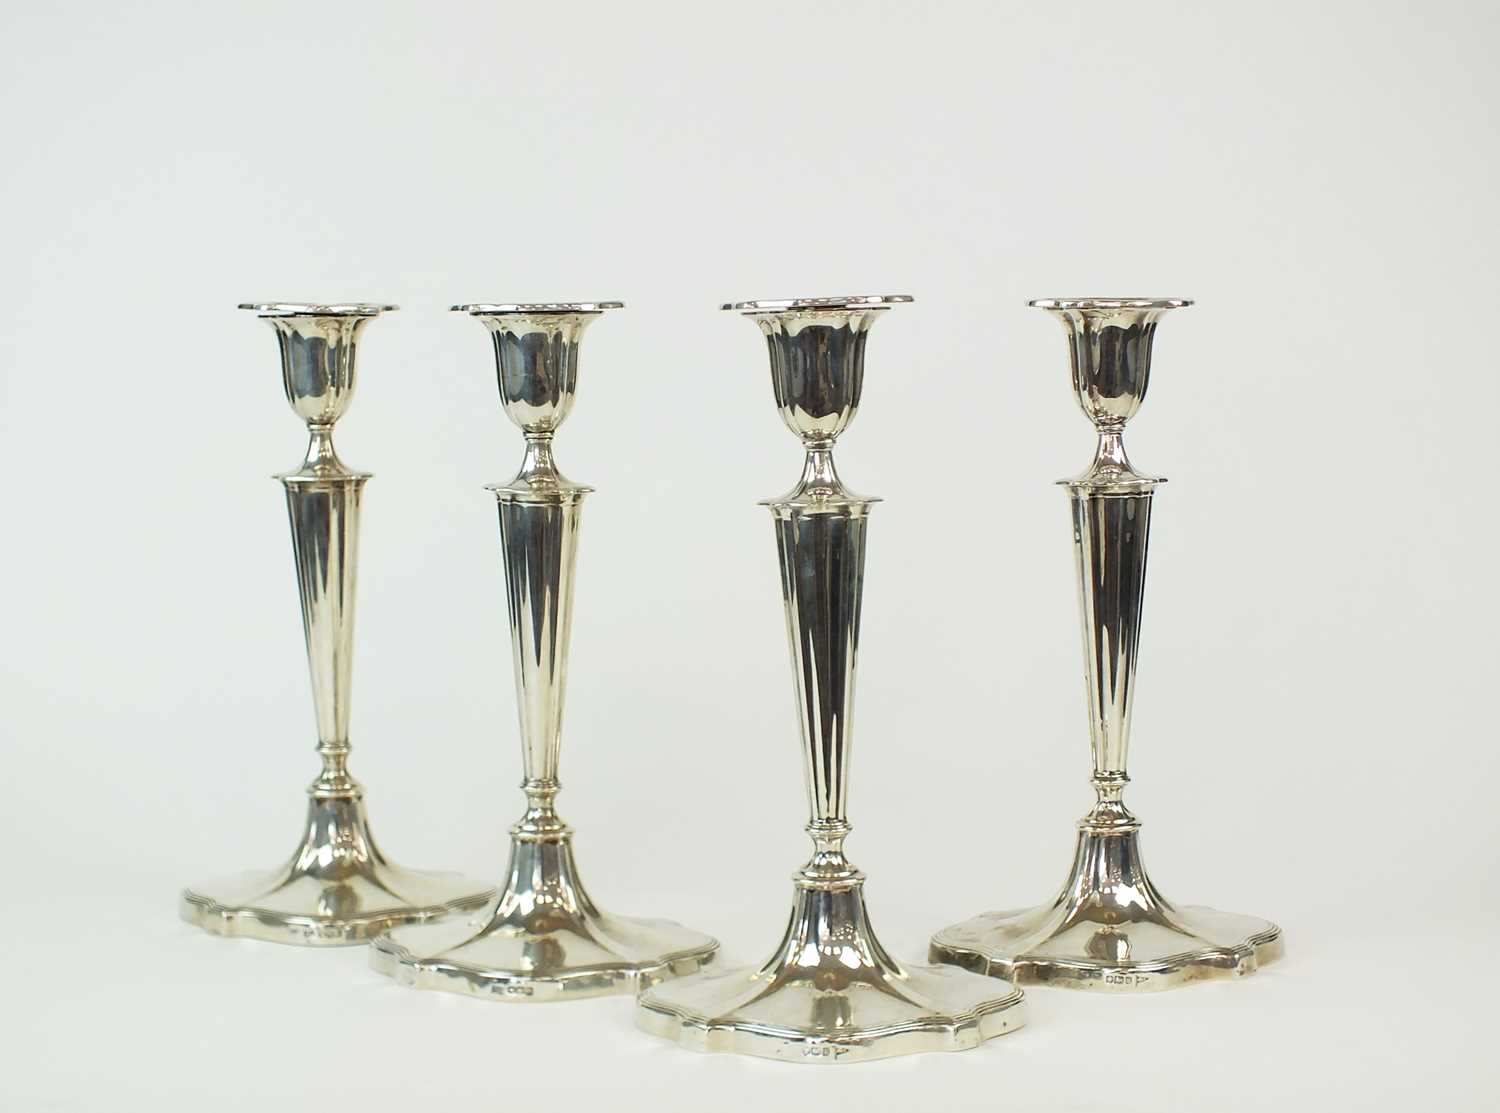 Lot 89 - A set of four silver mounted candlesticks